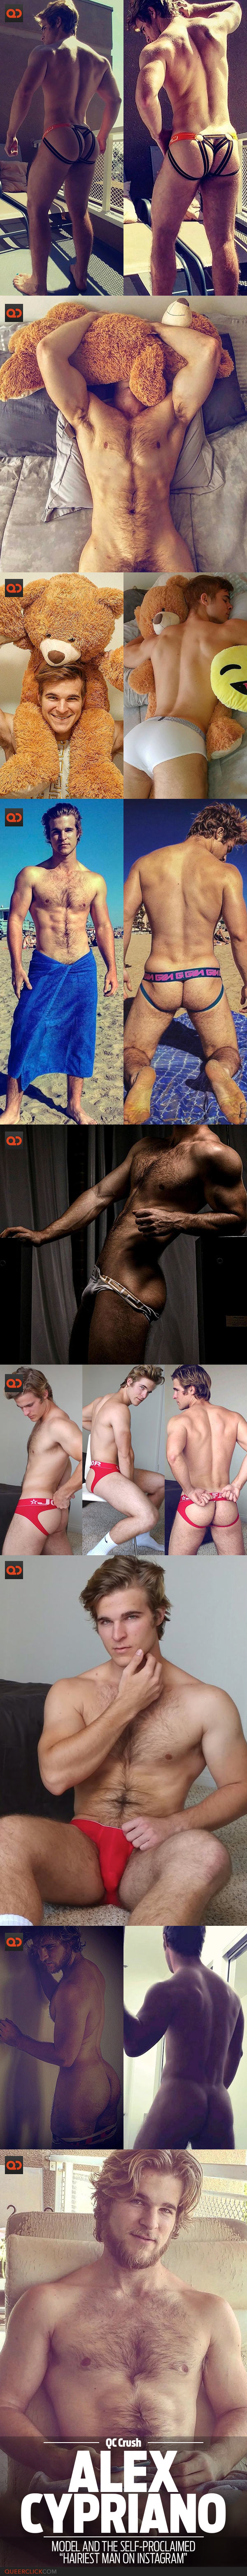 QC Crush: Alex Cypriano - Model And The Self-Proclaimed “Hairiest Man On Instagram!”